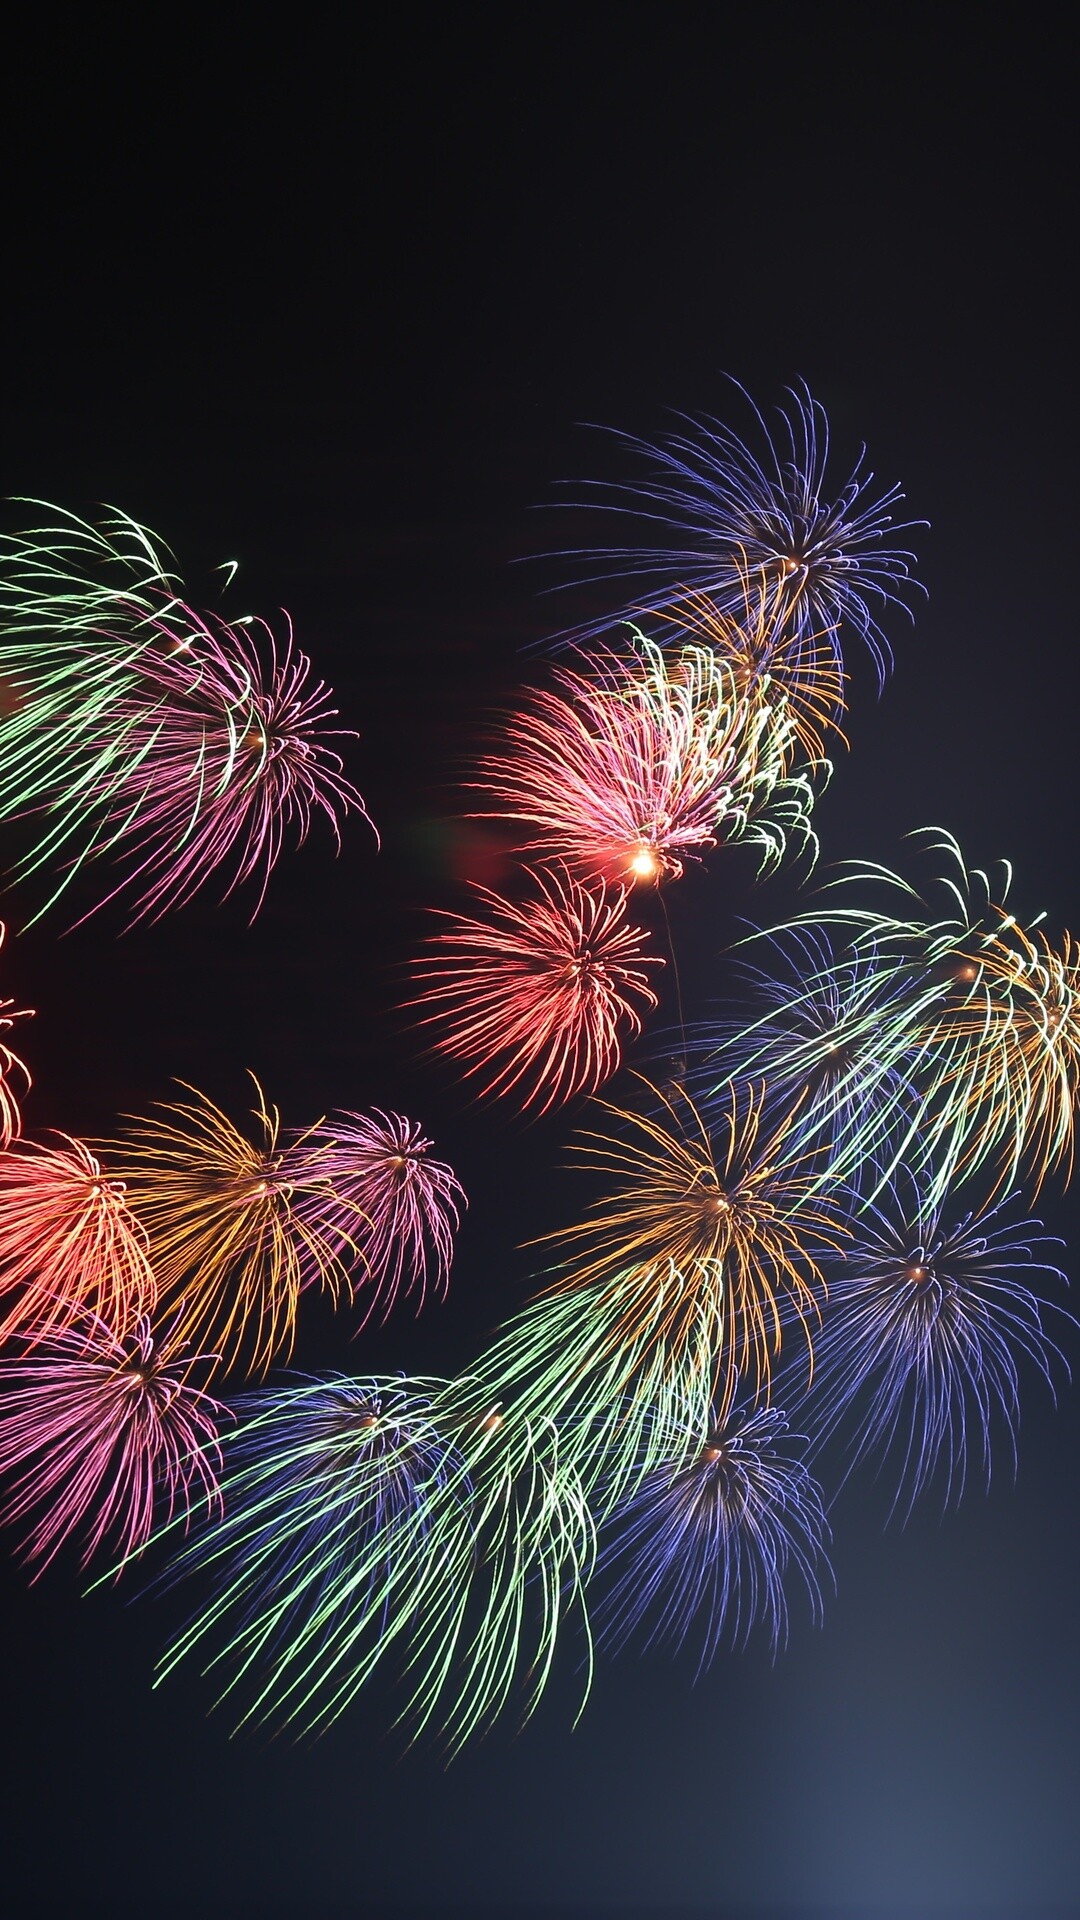 Firework: Was invented more than 2000 years ago in China, Pyrotechnics. 1080x1920 Full HD Wallpaper.